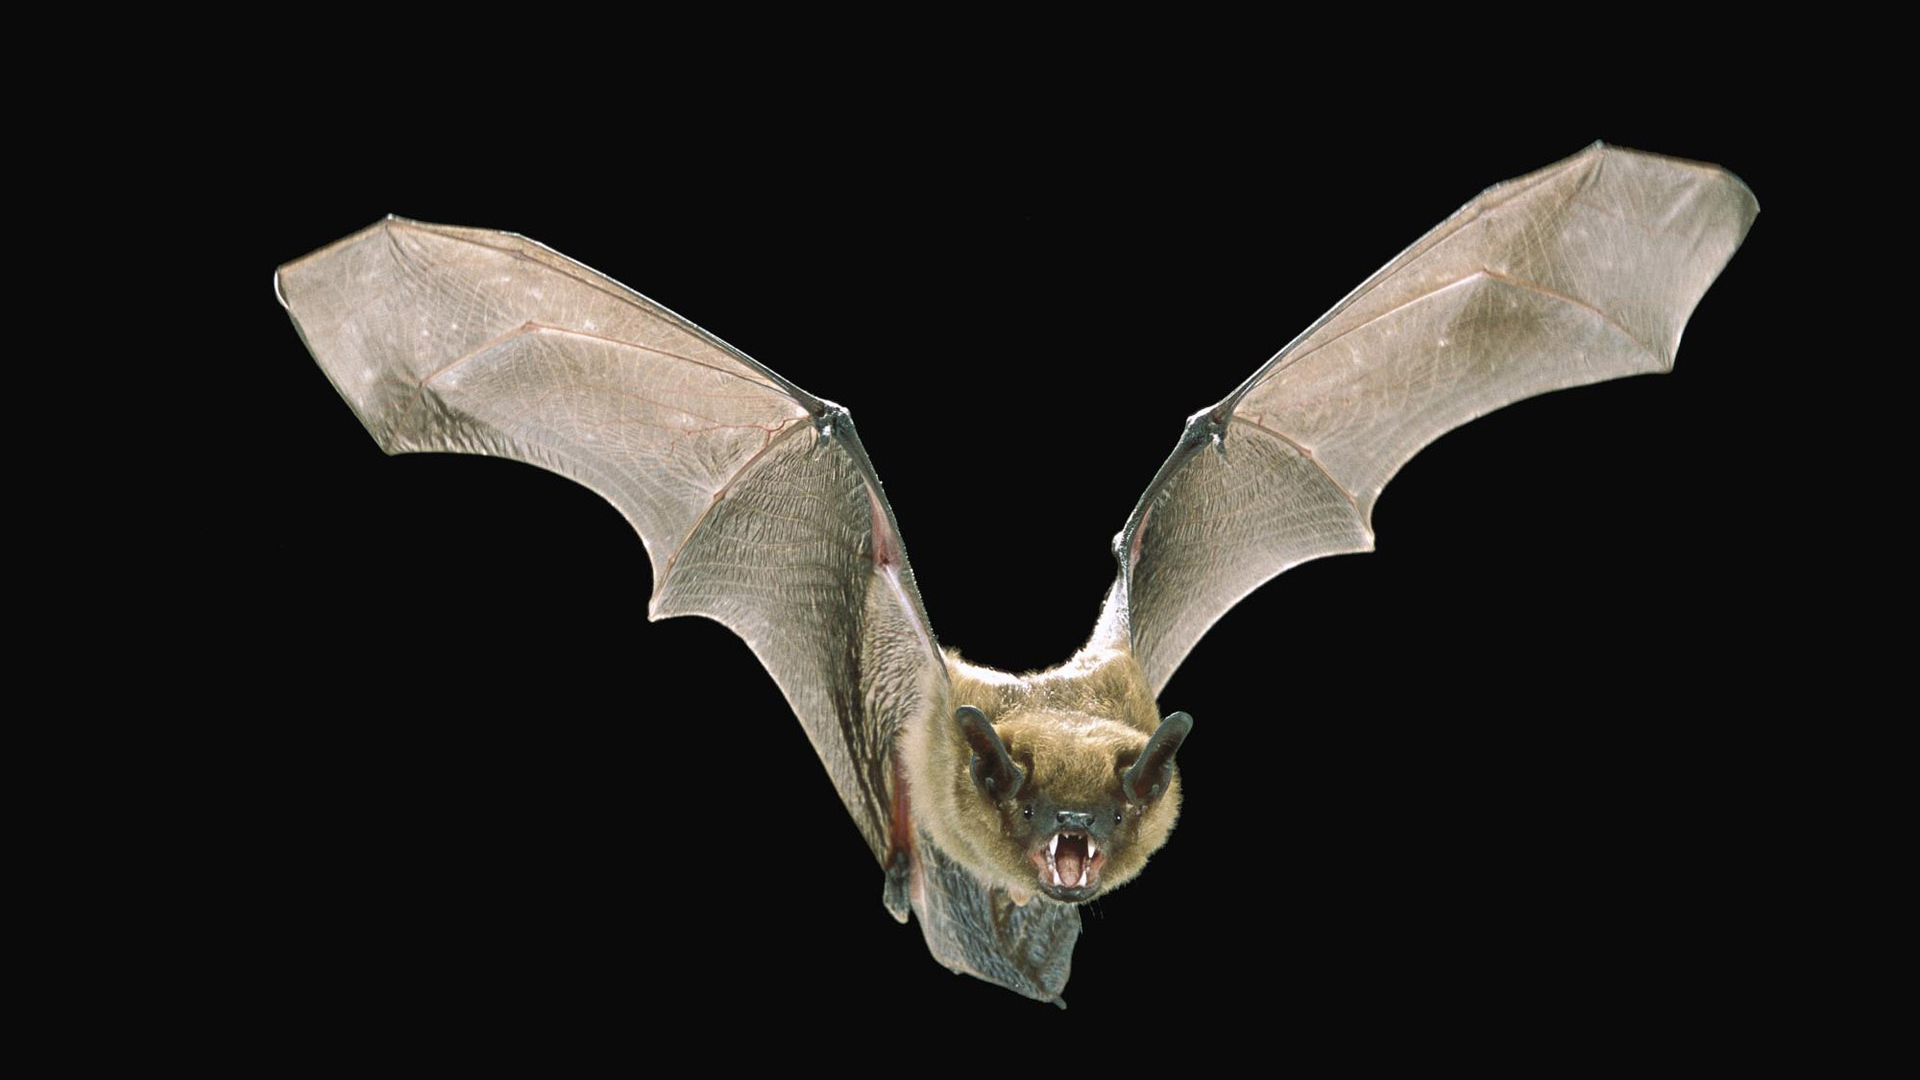 Big brown bat in flight. Photo © Angell Williams / Flickr through a Creative Commons license